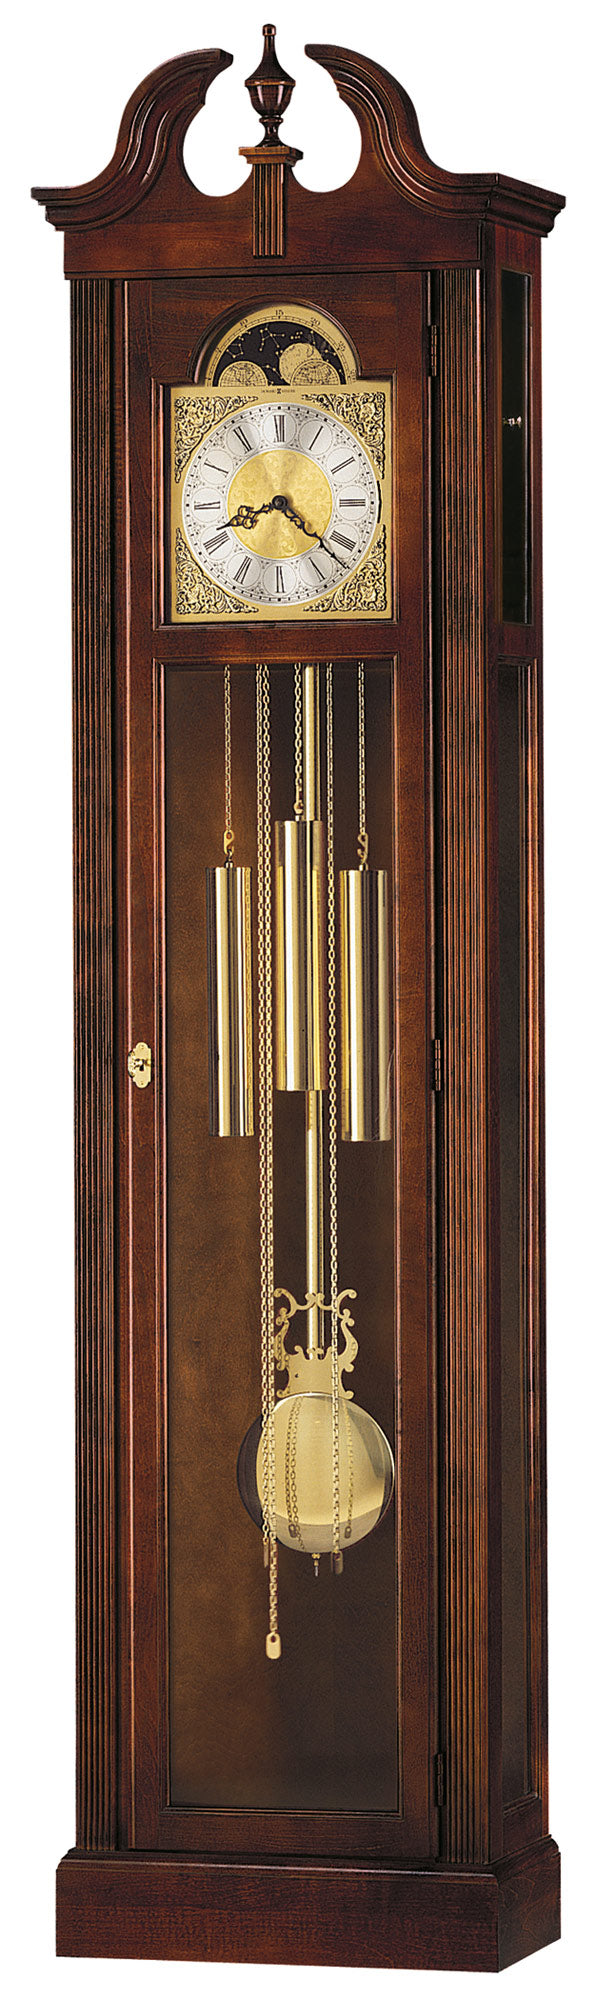 Chateau Grandfather Clock by Howard Miller